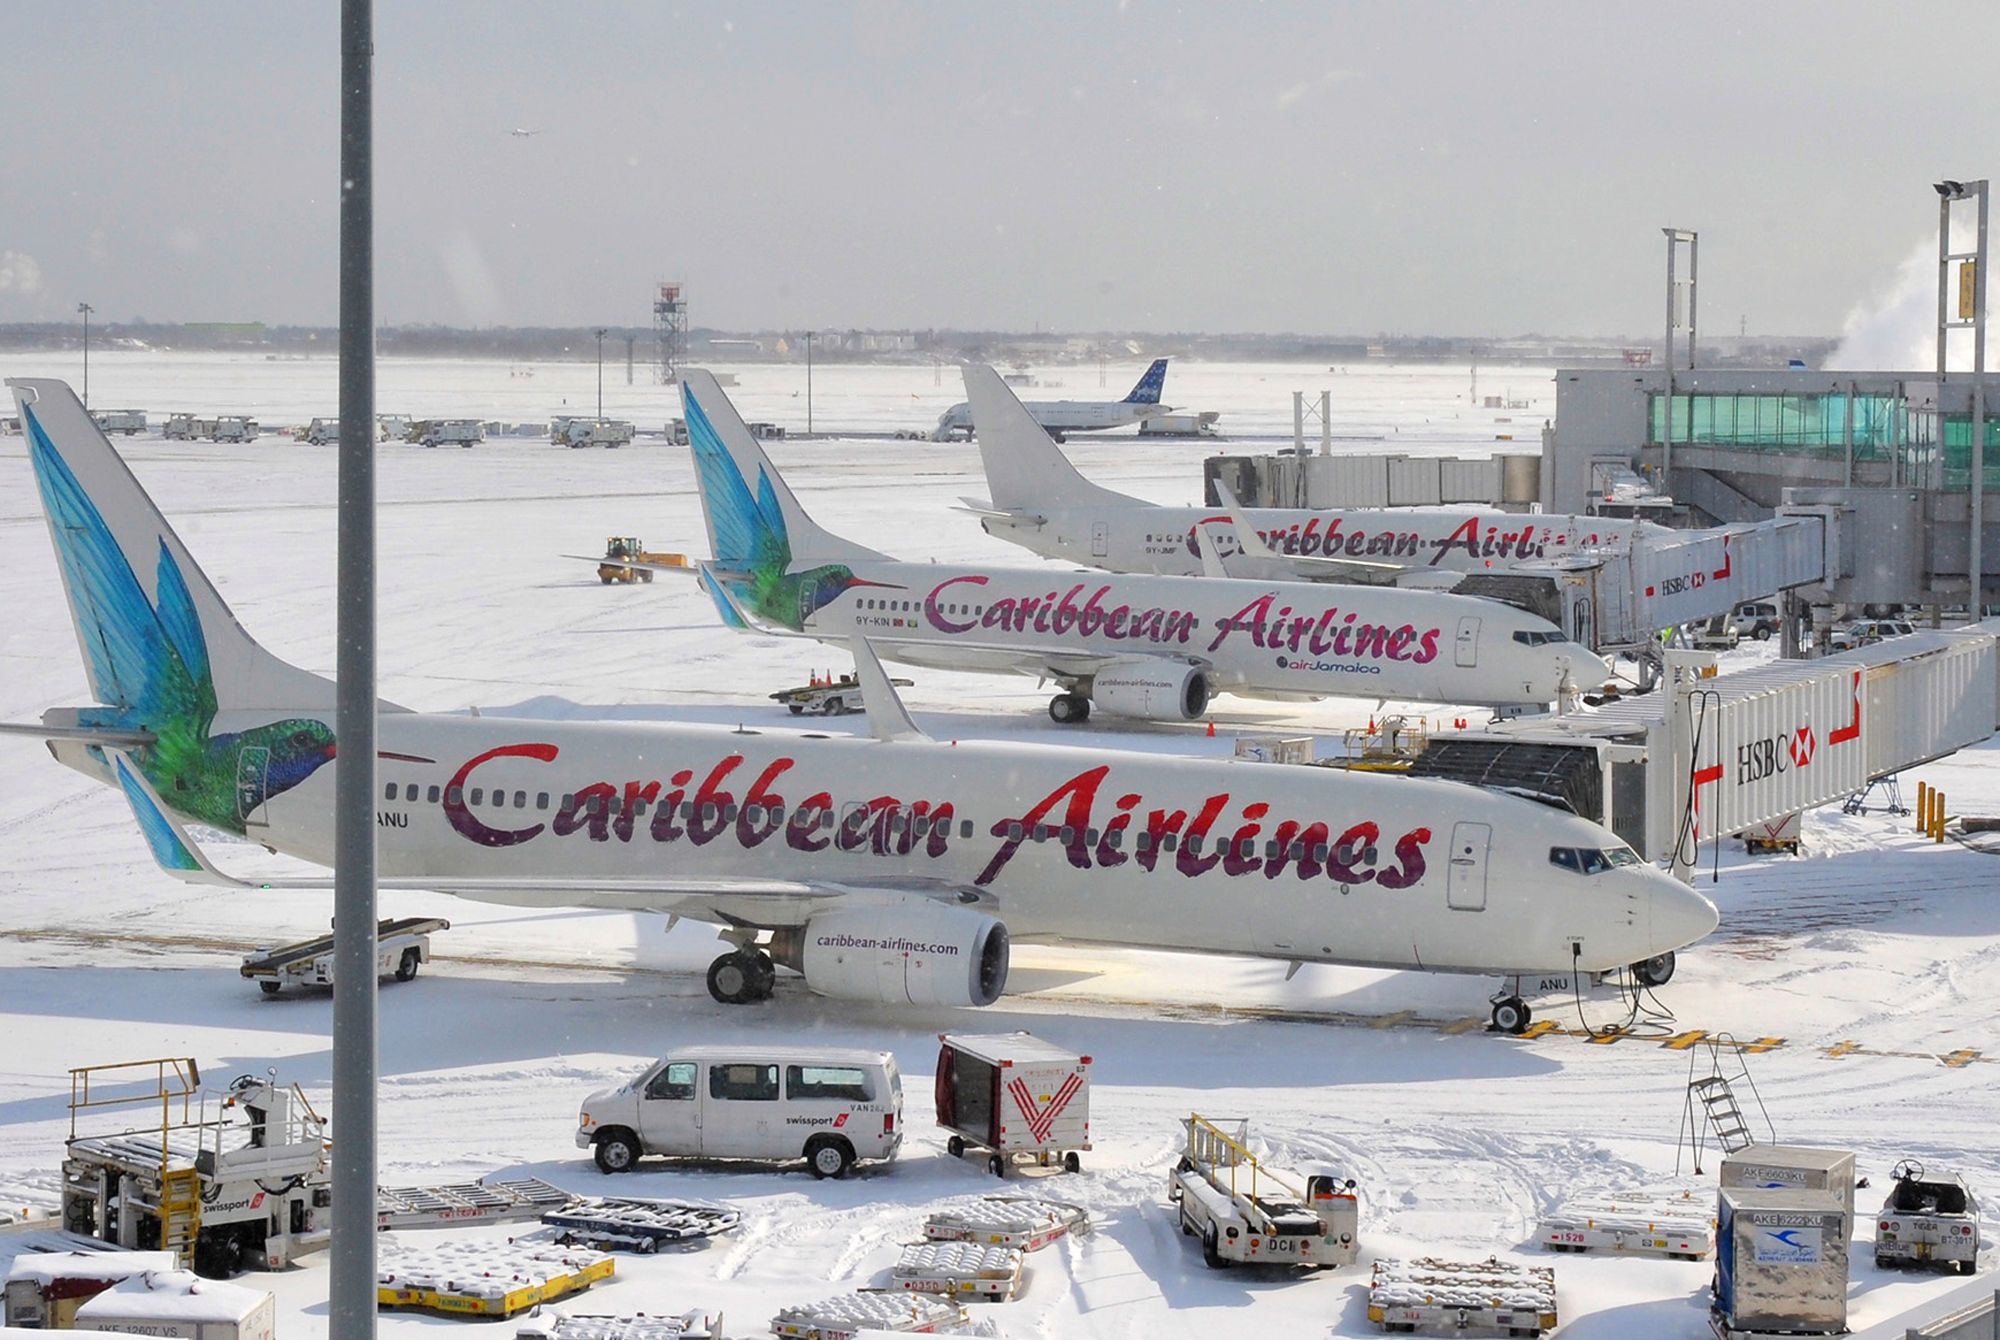 Caribbean Airlines planes on tarmac